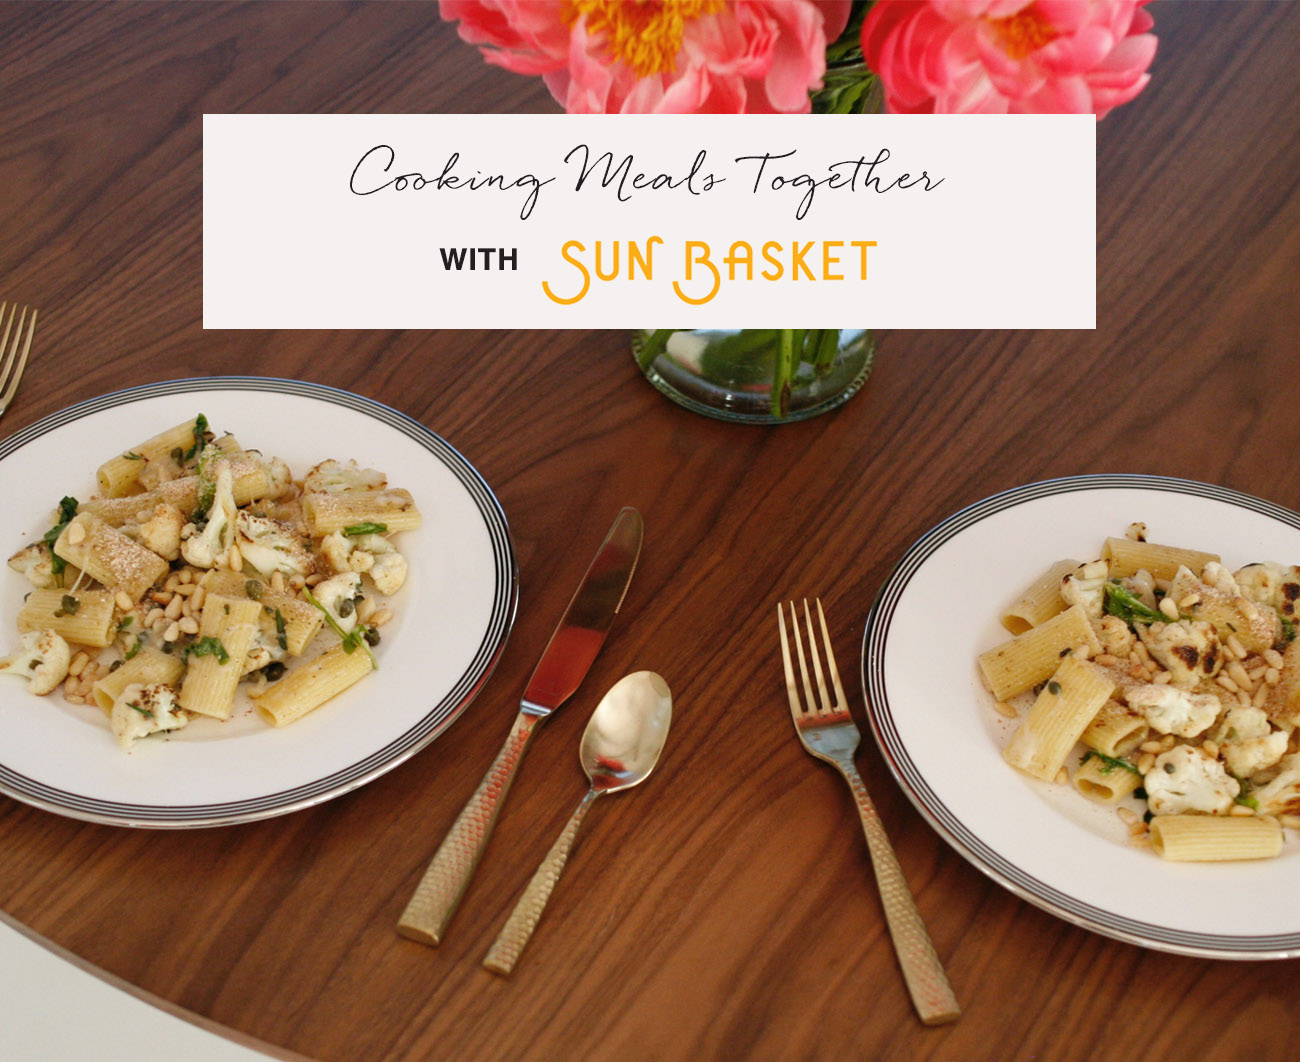 Sun Basket Meals for Date Night